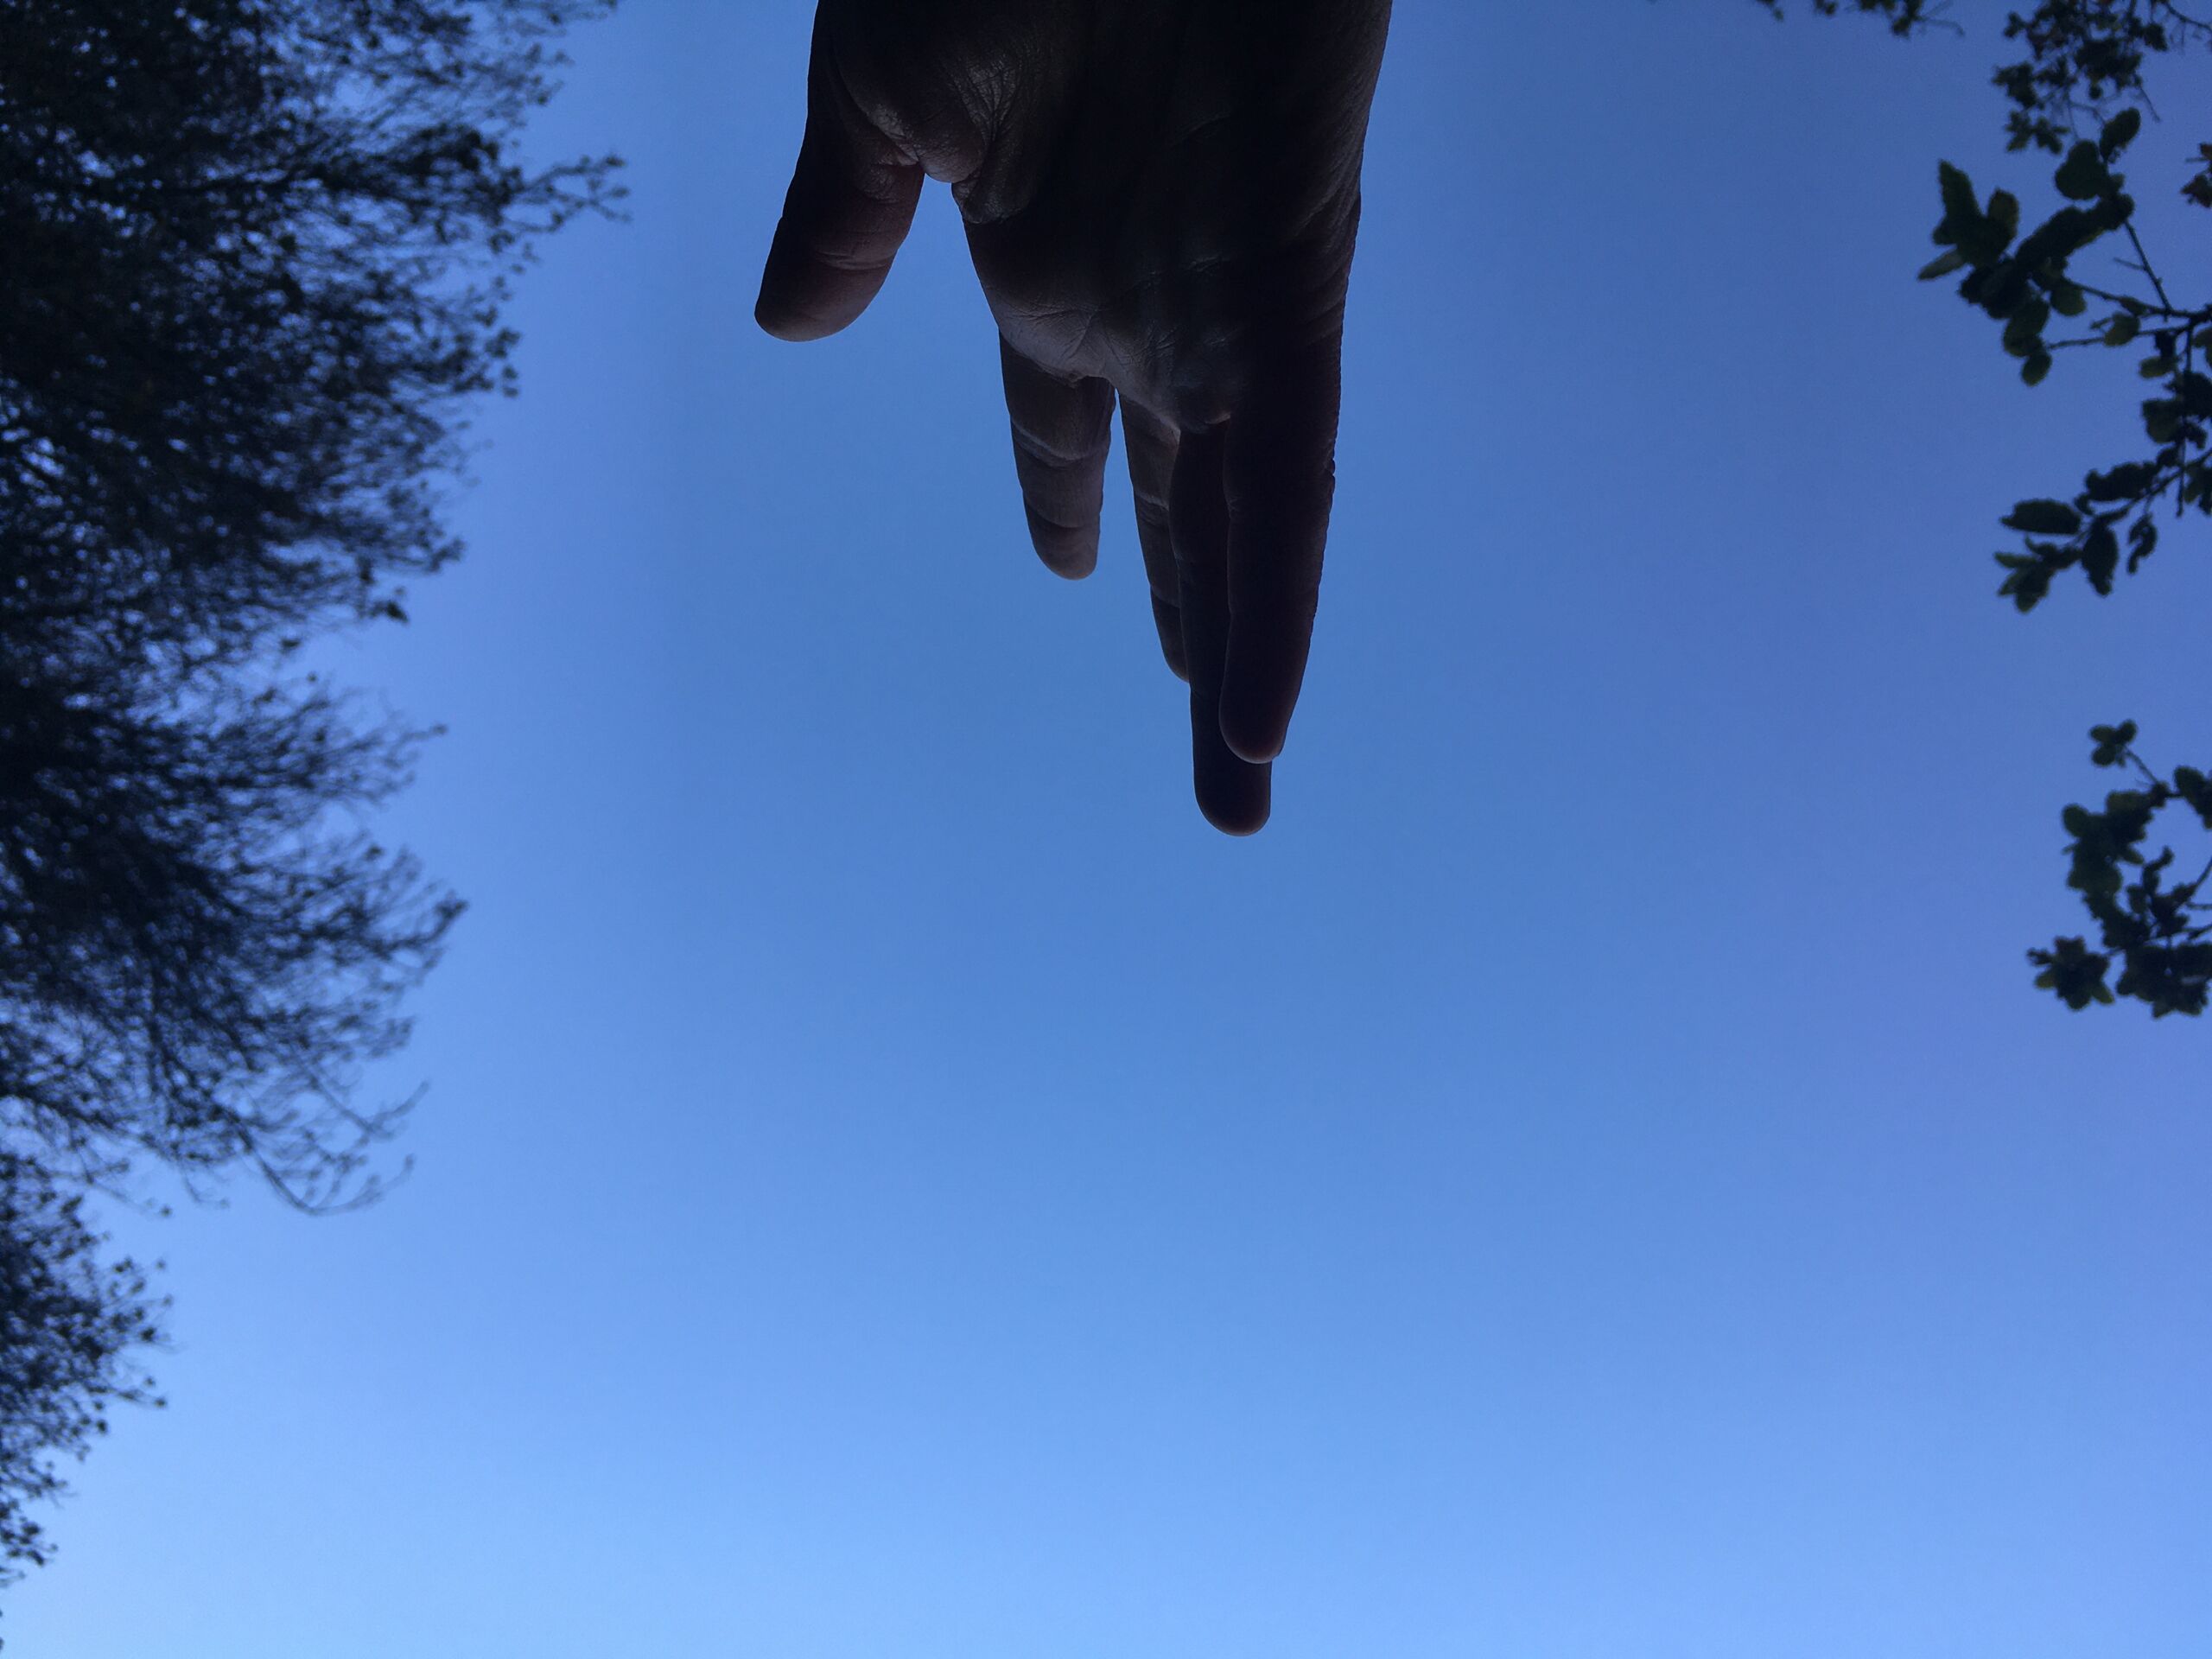 Image is a photo of a hand viewed from below, reaching between the silhouette of two trees with a blue sky